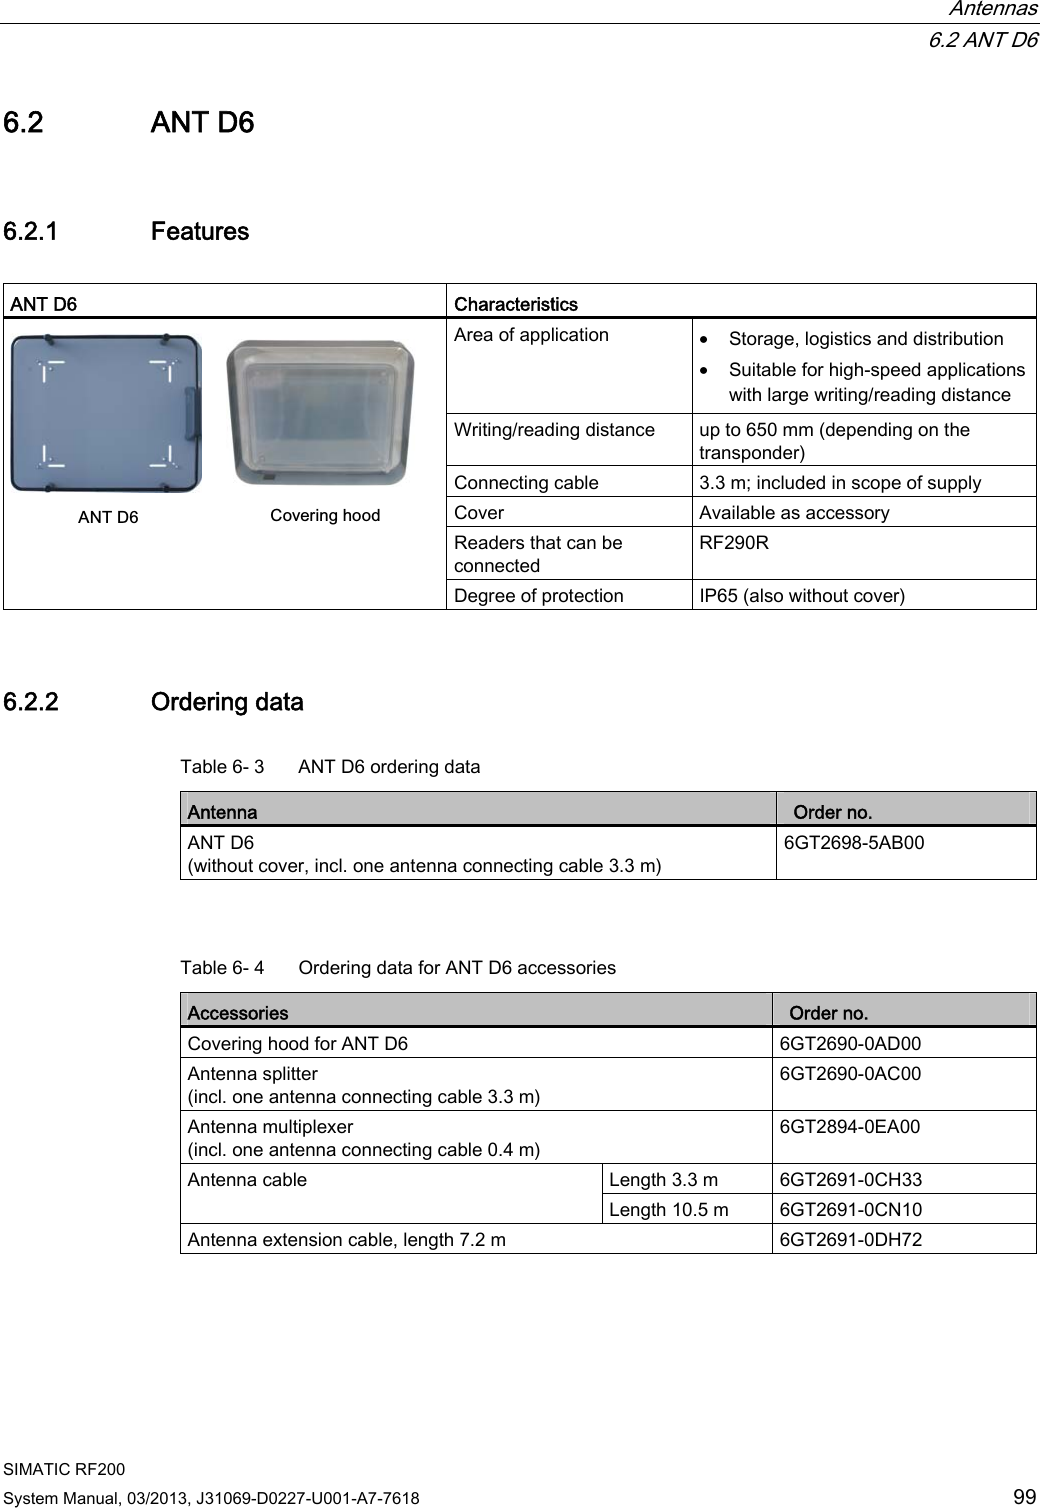  Antennas  6.2 ANT D6 SIMATIC RF200 System Manual, 03/2013, J31069-D0227-U001-A7-7618  99 6.2 ANT D6 6.2.1 Features  ANT D6  Characteristics Area of application  • Storage, logistics and distribution • Suitable for high-speed applications with large writing/reading distance Writing/reading distance  up to 650 mm (depending on the transponder) Connecting cable  3.3 m; included in scope of supply Cover  Available as accessory Readers that can be connected RF290R $17&apos; &amp;RYHULQJKRRG Degree of protection  IP65 (also without cover) 6.2.2 Ordering data Table 6- 3  ANT D6 ordering data Antenna   Order no. ANT D6 (without cover, incl. one antenna connecting cable 3.3 m) 6GT2698-5AB00   Table 6- 4  Ordering data for ANT D6 accessories Accessories   Order no. Covering hood for ANT D6  6GT2690-0AD00 Antenna splitter (incl. one antenna connecting cable 3.3 m) 6GT2690-0AC00 Antenna multiplexer (incl. one antenna connecting cable 0.4 m) 6GT2894-0EA00 Length 3.3 m  6GT2691-0CH33 Antenna cable Length 10.5 m  6GT2691-0CN10 Antenna extension cable, length 7.2 m  6GT2691-0DH72 